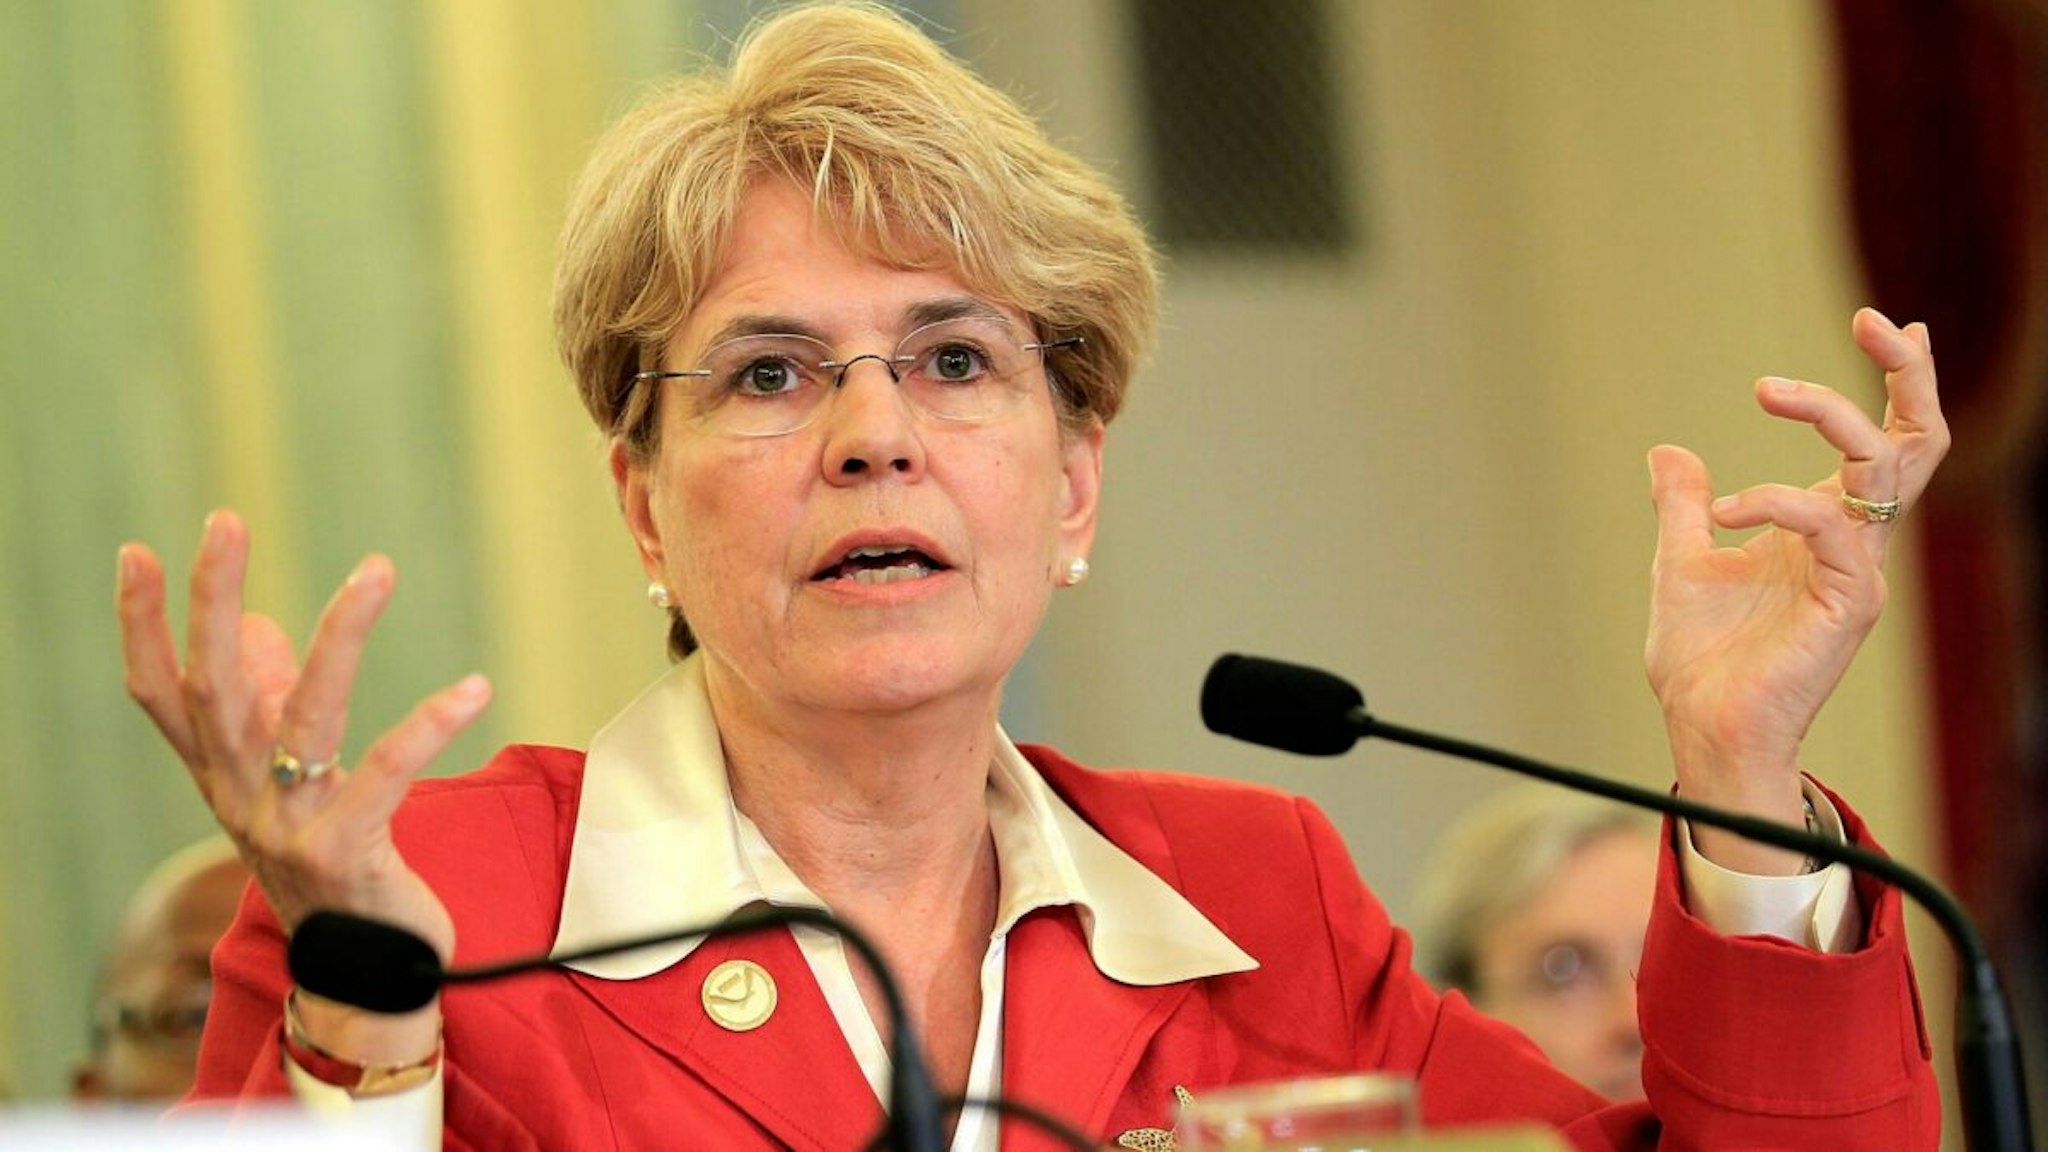 WASHINGTON - MAY 18: Jane Lubchenco, Administrator of the National Oceanic and Atmospheric Administration, testifies during a hearing before the Senate Commerce, Science, and Transportation Committee May 18, 2010 on Capitol Hill in Washington, DC.